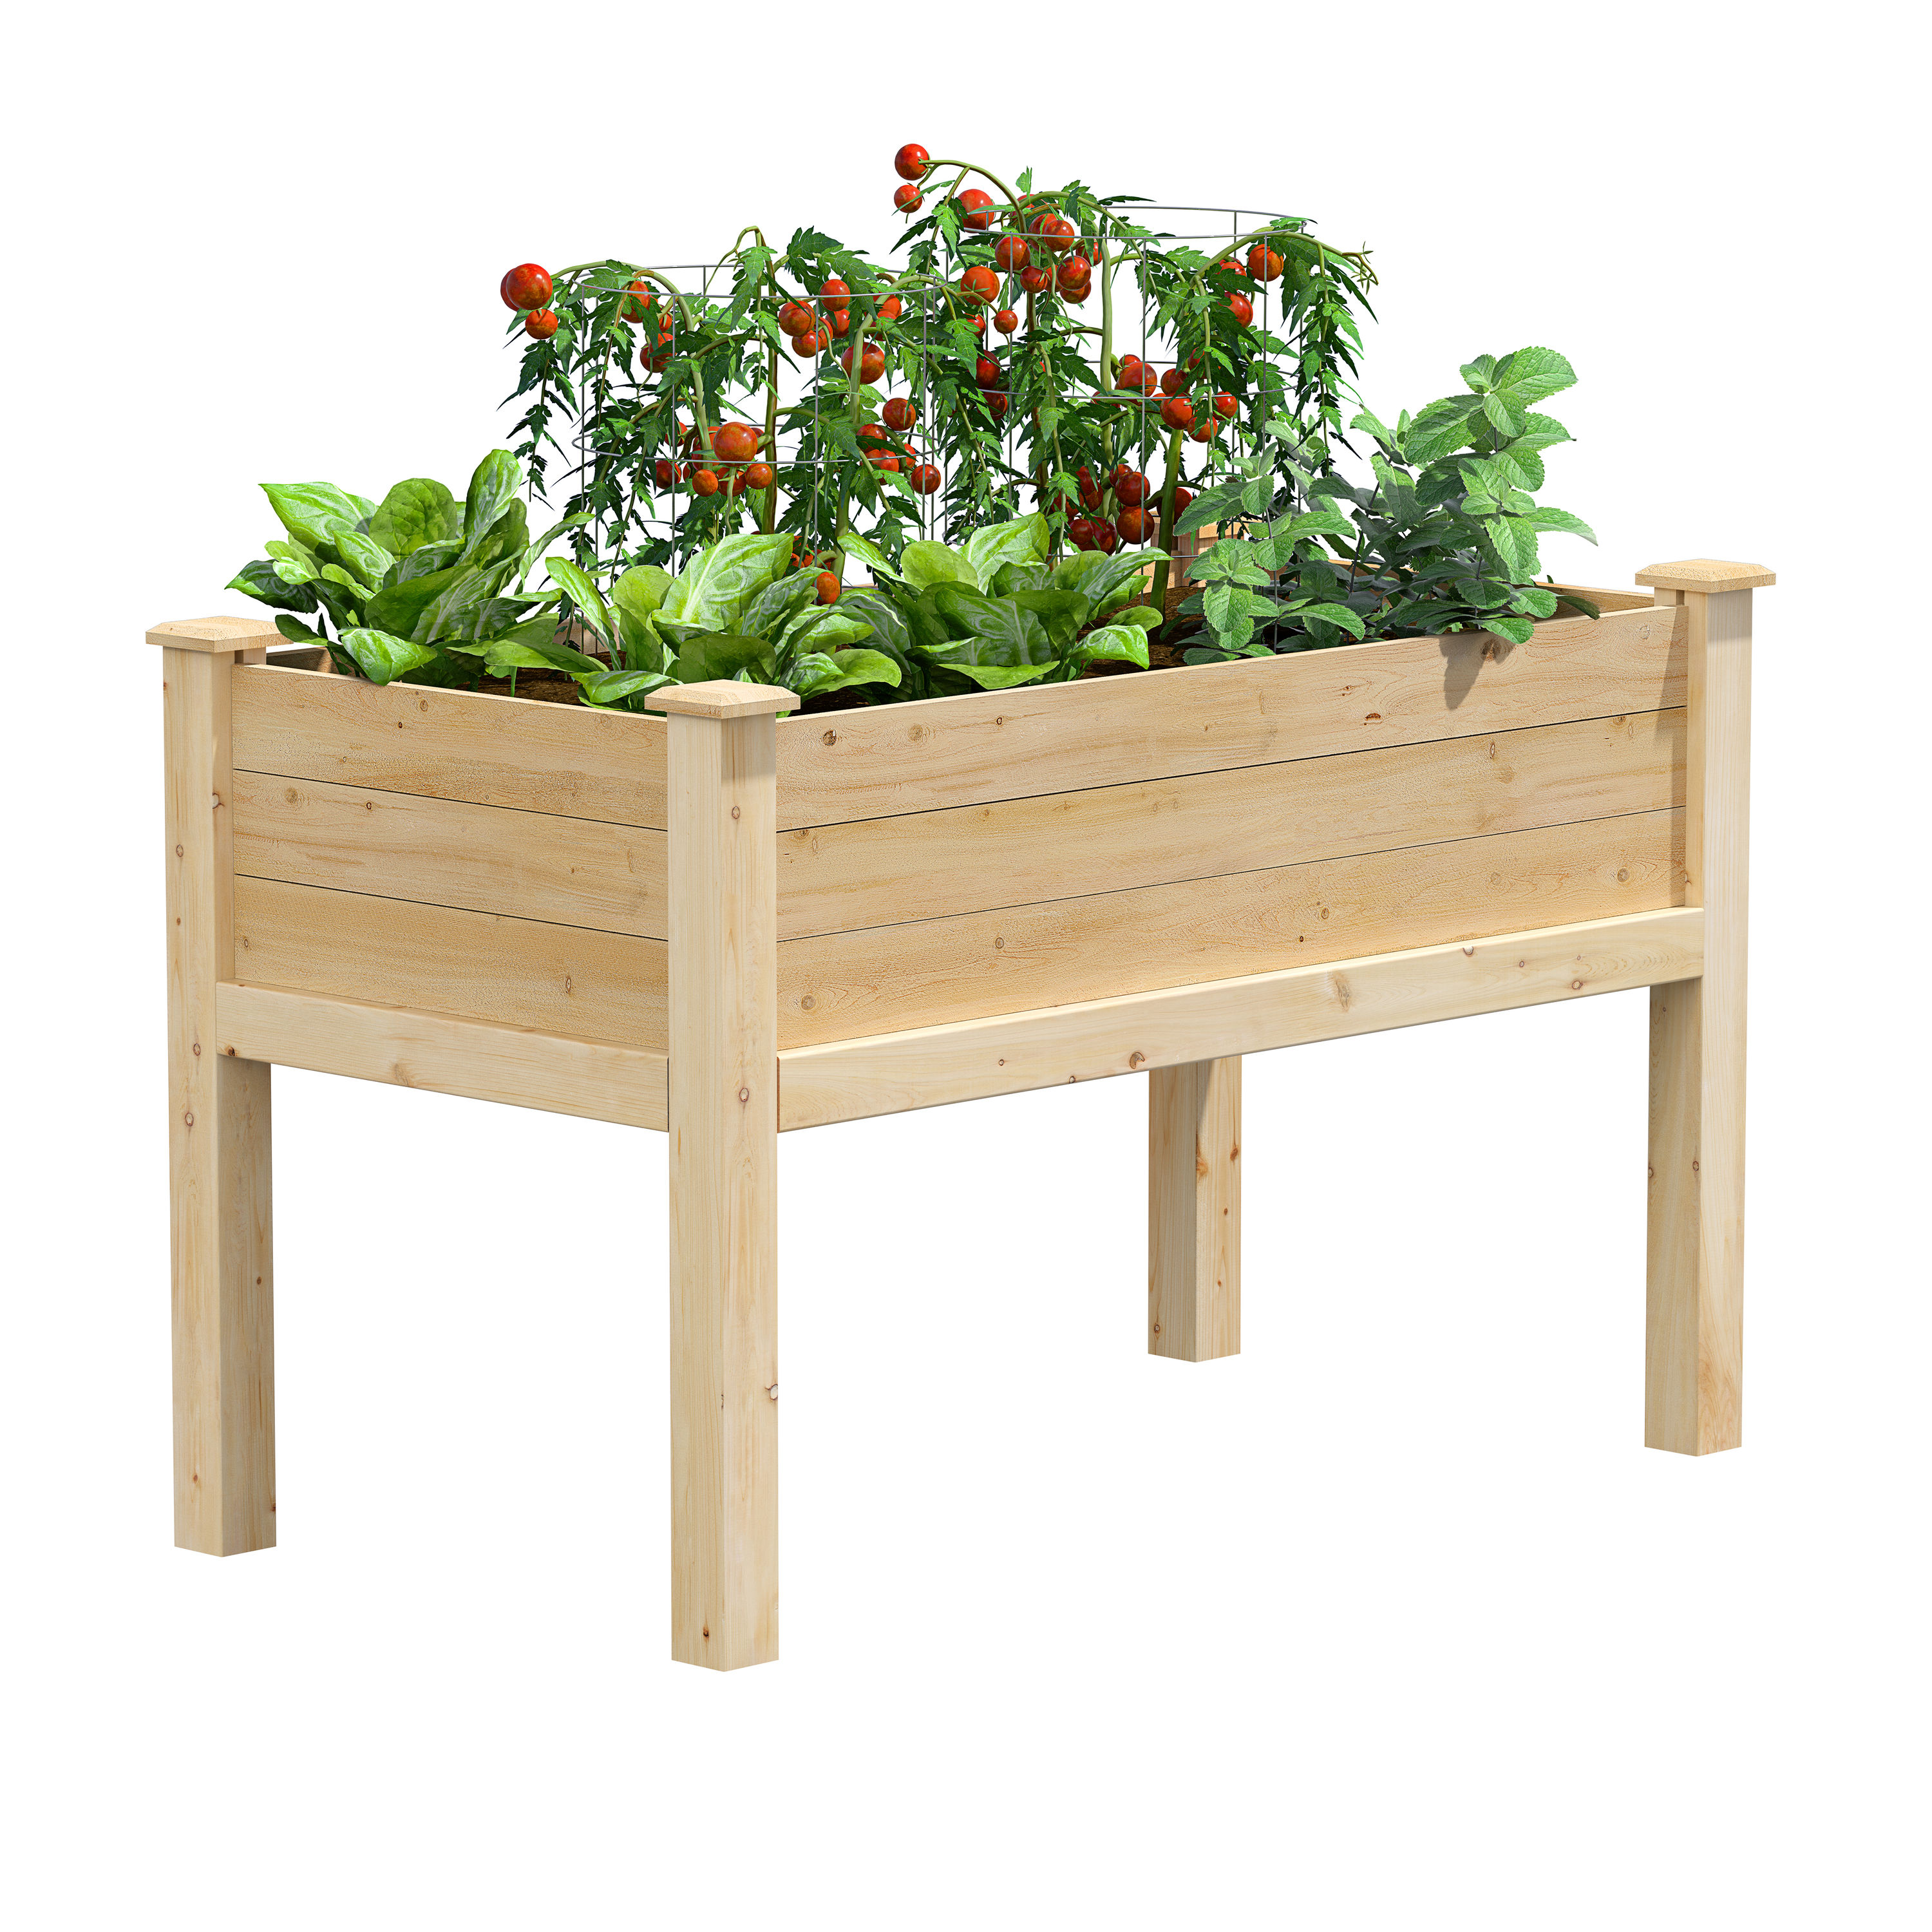 Planter Flower Box For Garden Balcony Table Decoration with Water Latch Cover 